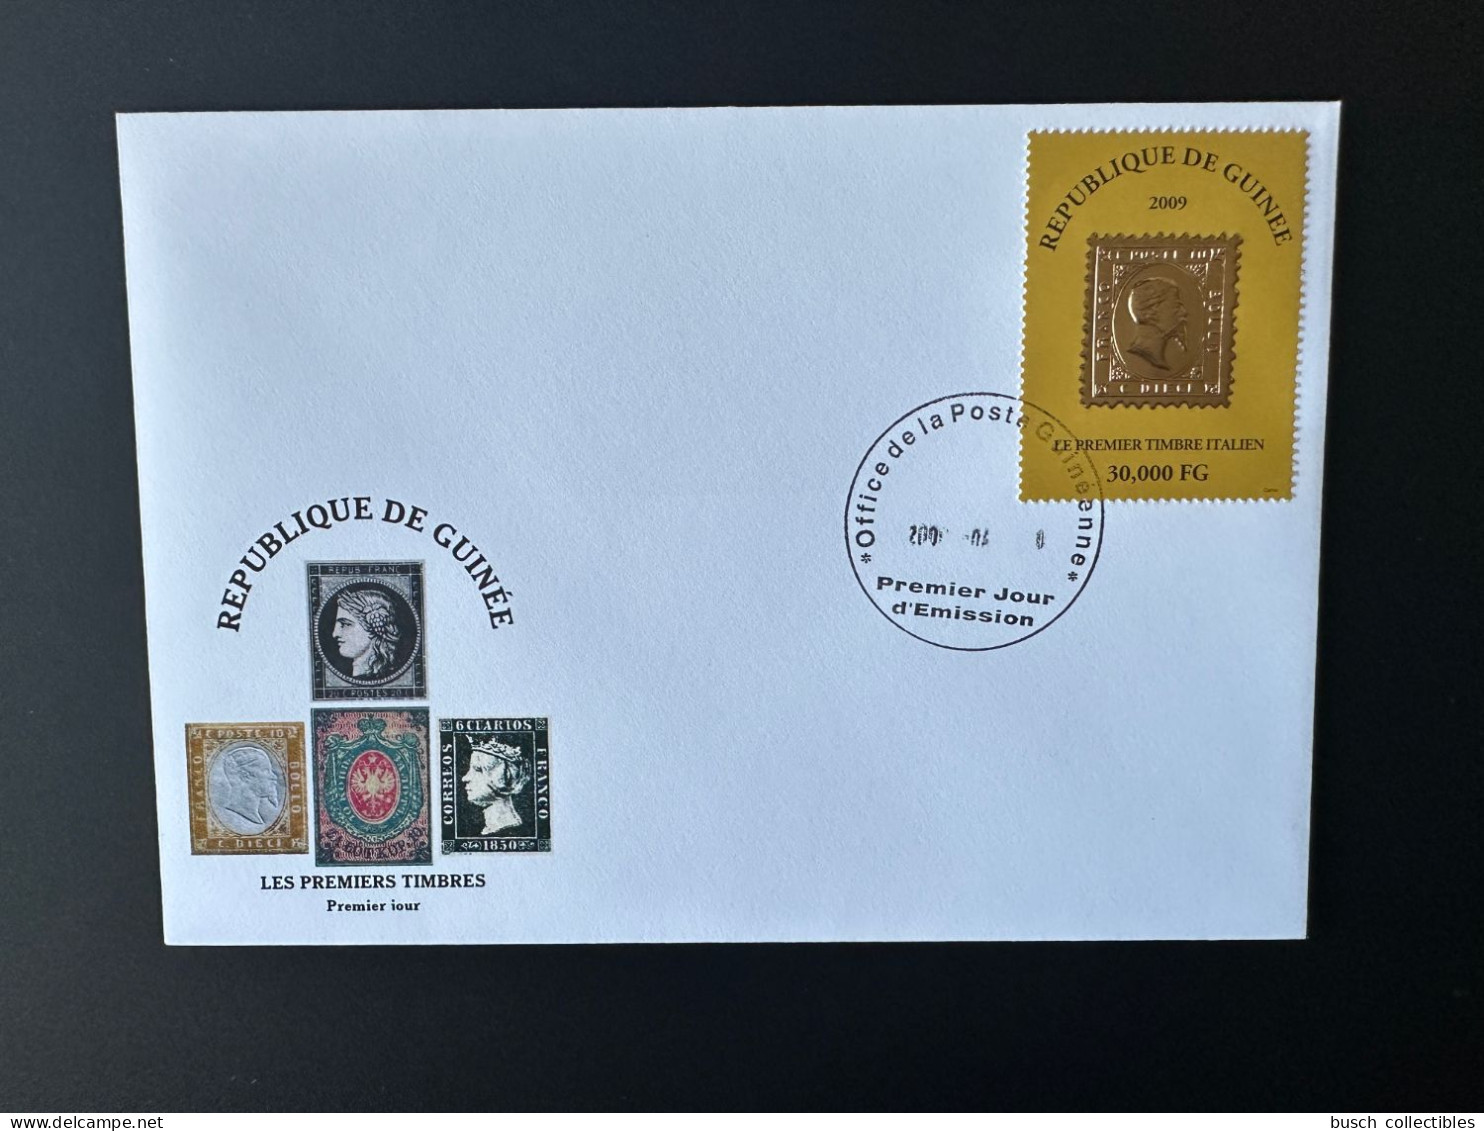 Guinée Guinea 2009 Mi. 6488 FDC Premier Timbre Italien First Italian Stamp On Stamp Gold Or Primo Francobollo Italiano - Ungebraucht